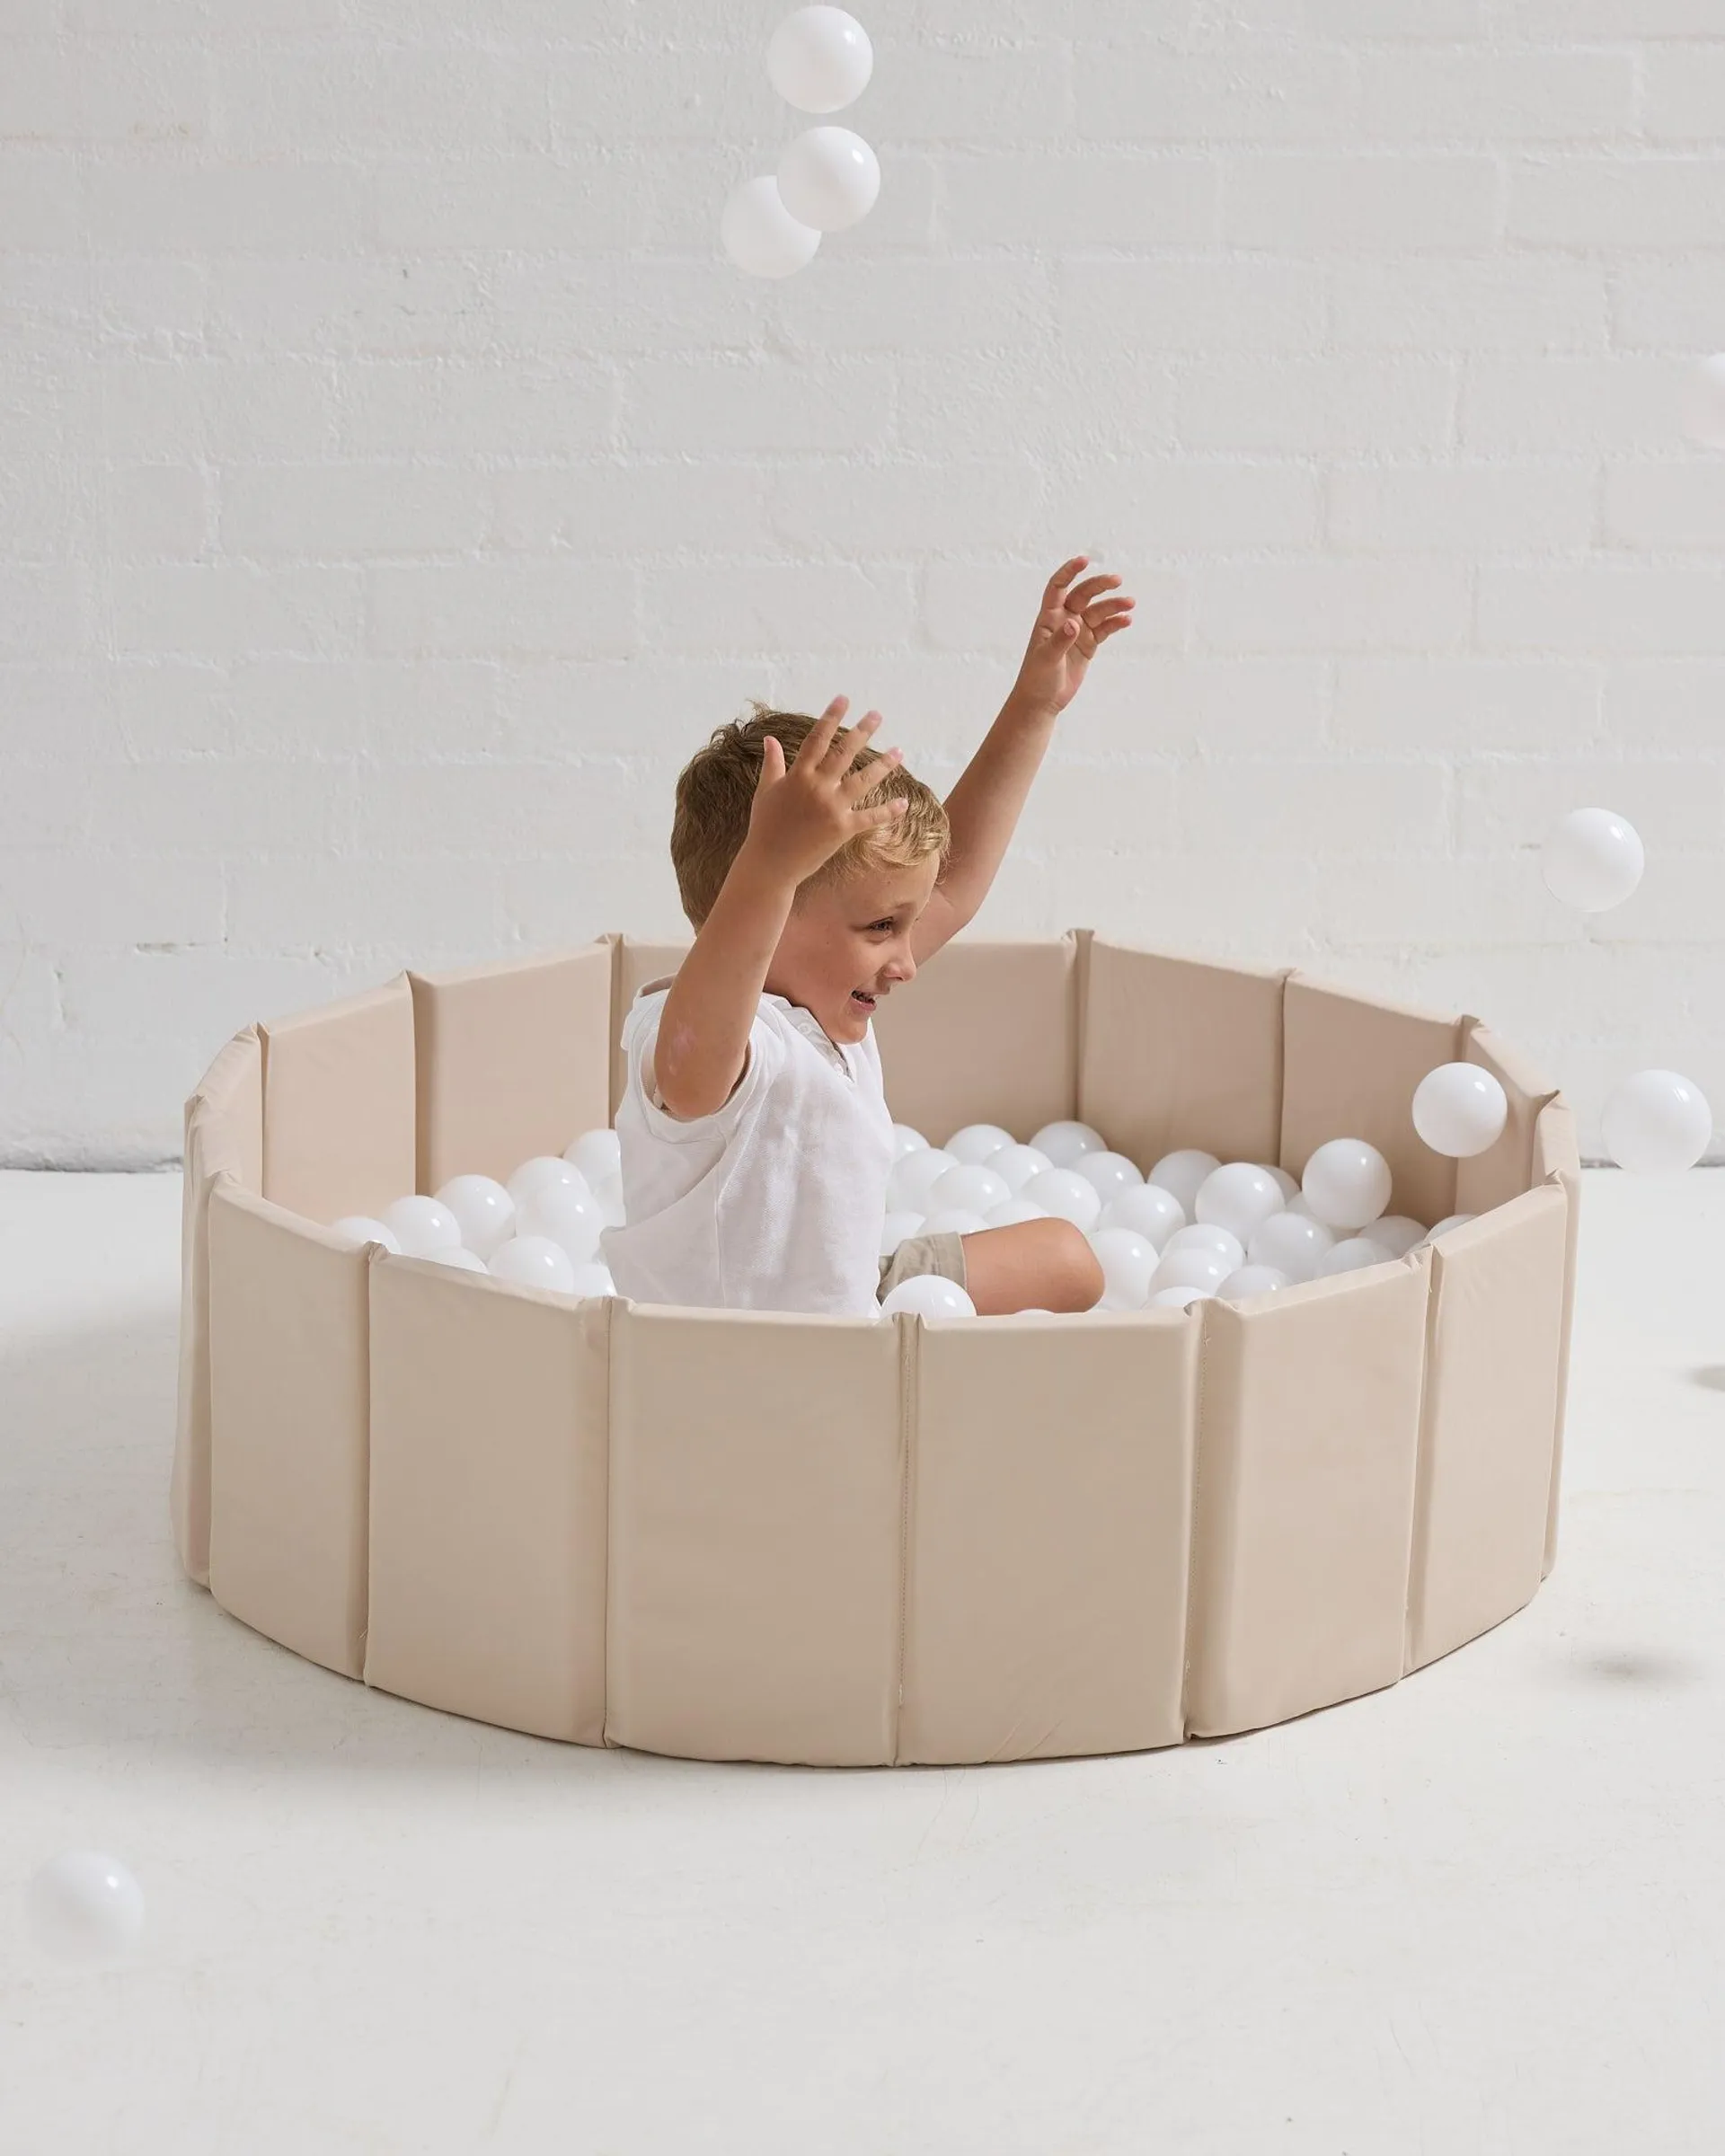 Eco Leather Beige Foldable Ball Pit + 200 balls